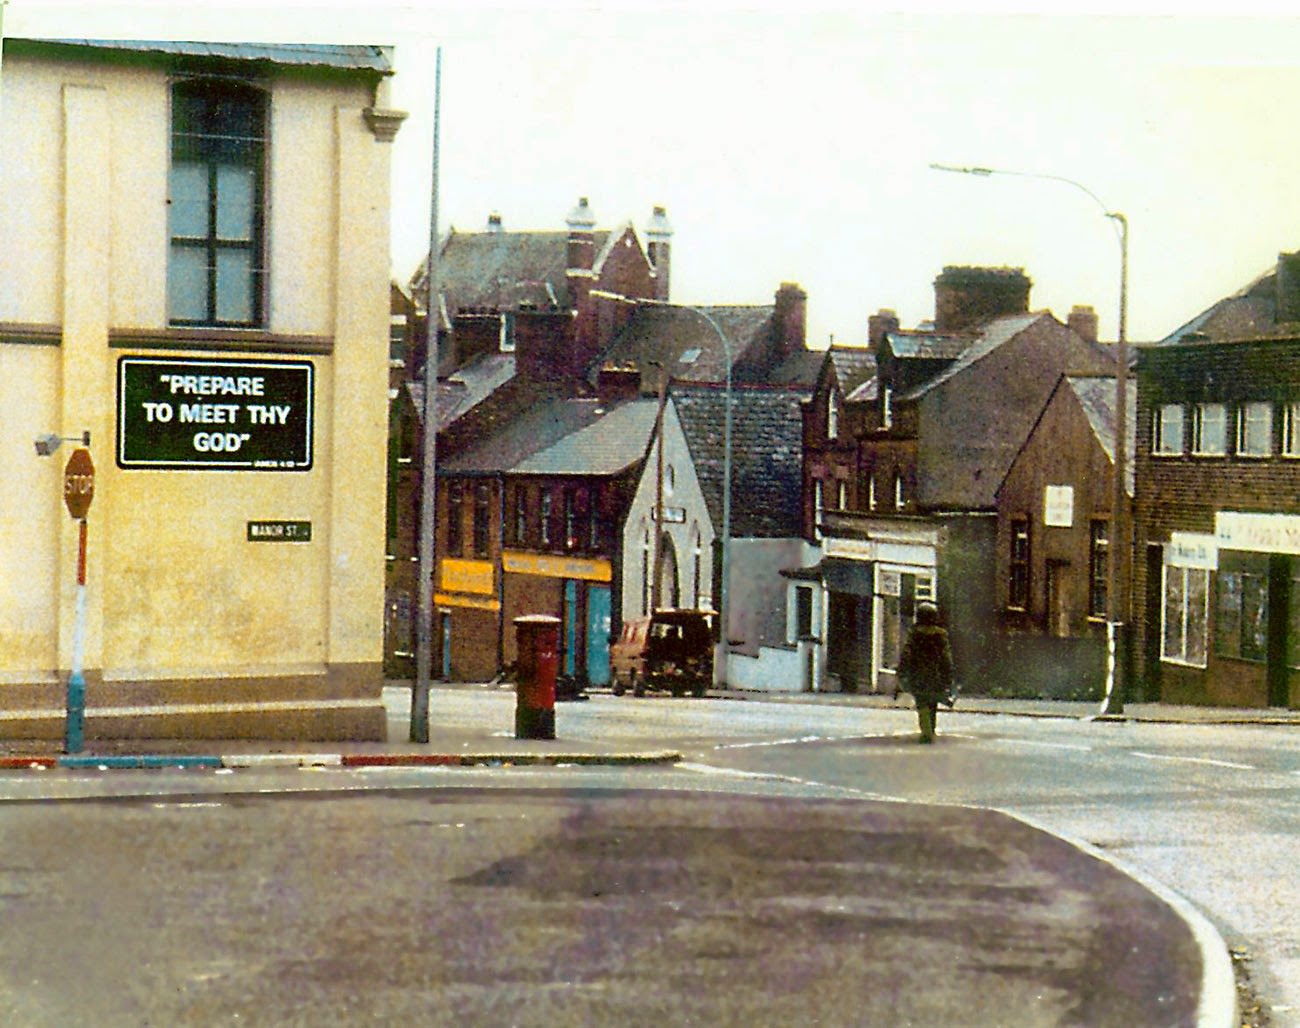 A British Army bomb disposal specialist approaches a car bomb during the troubles, 1970s.